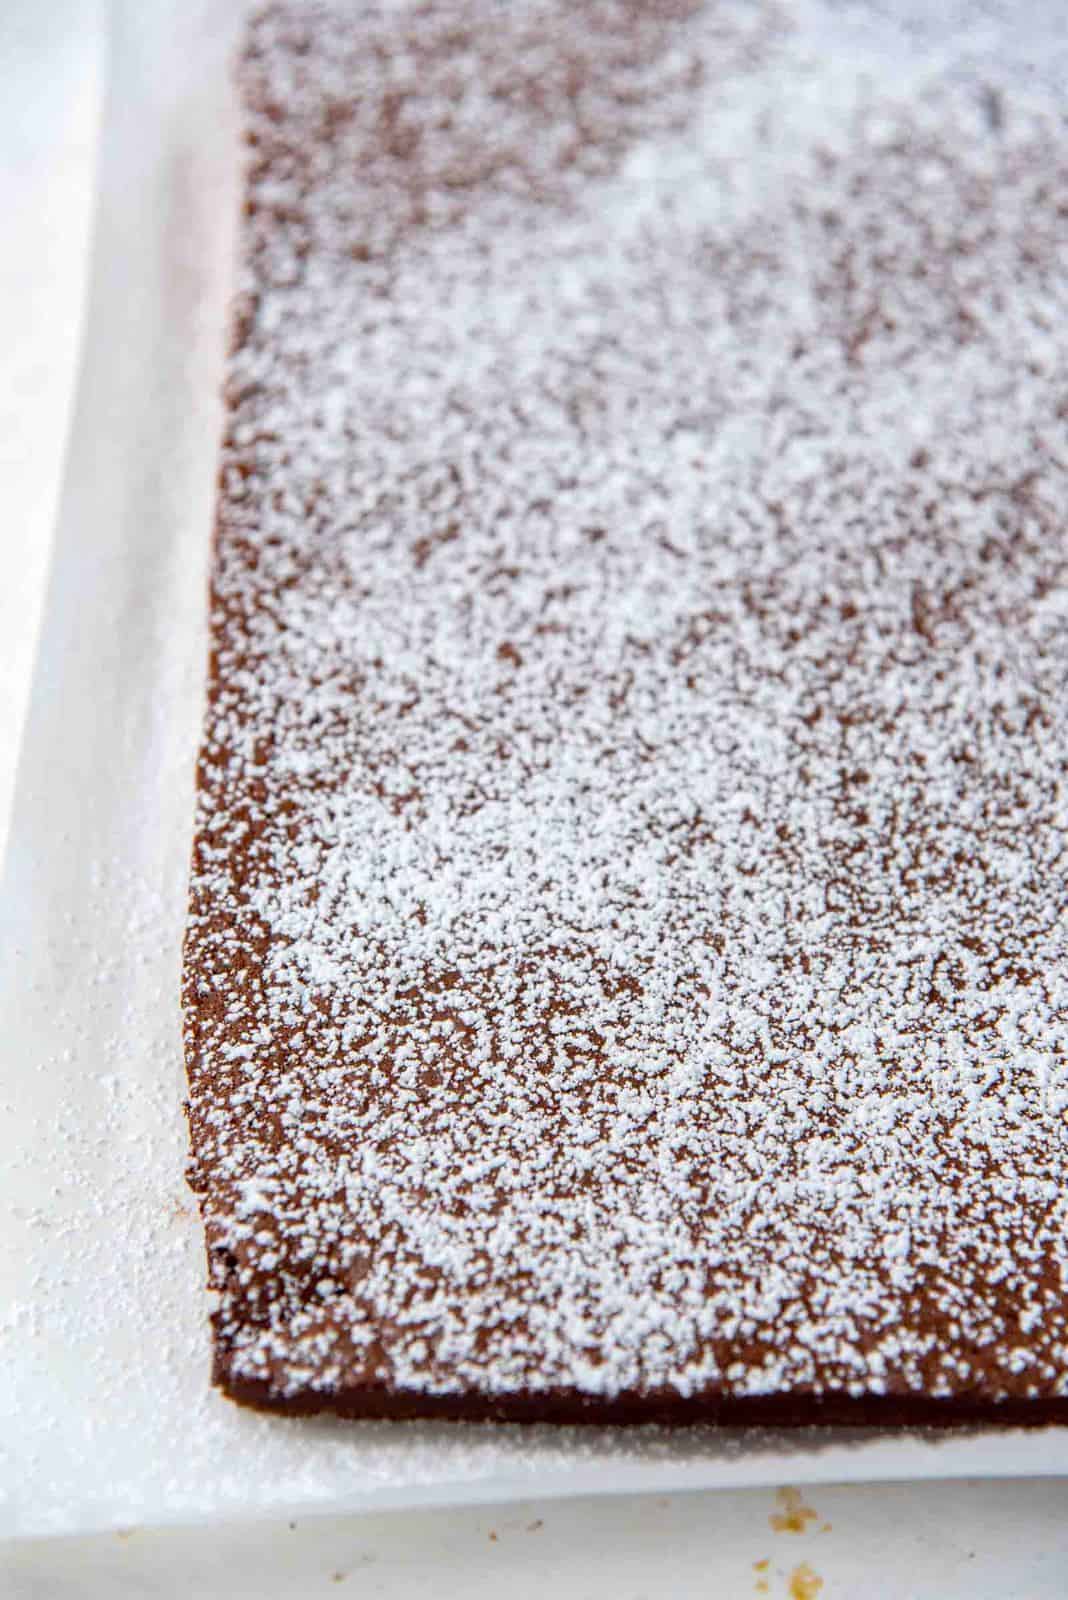 Cake sheet dusted with confectioners sugar